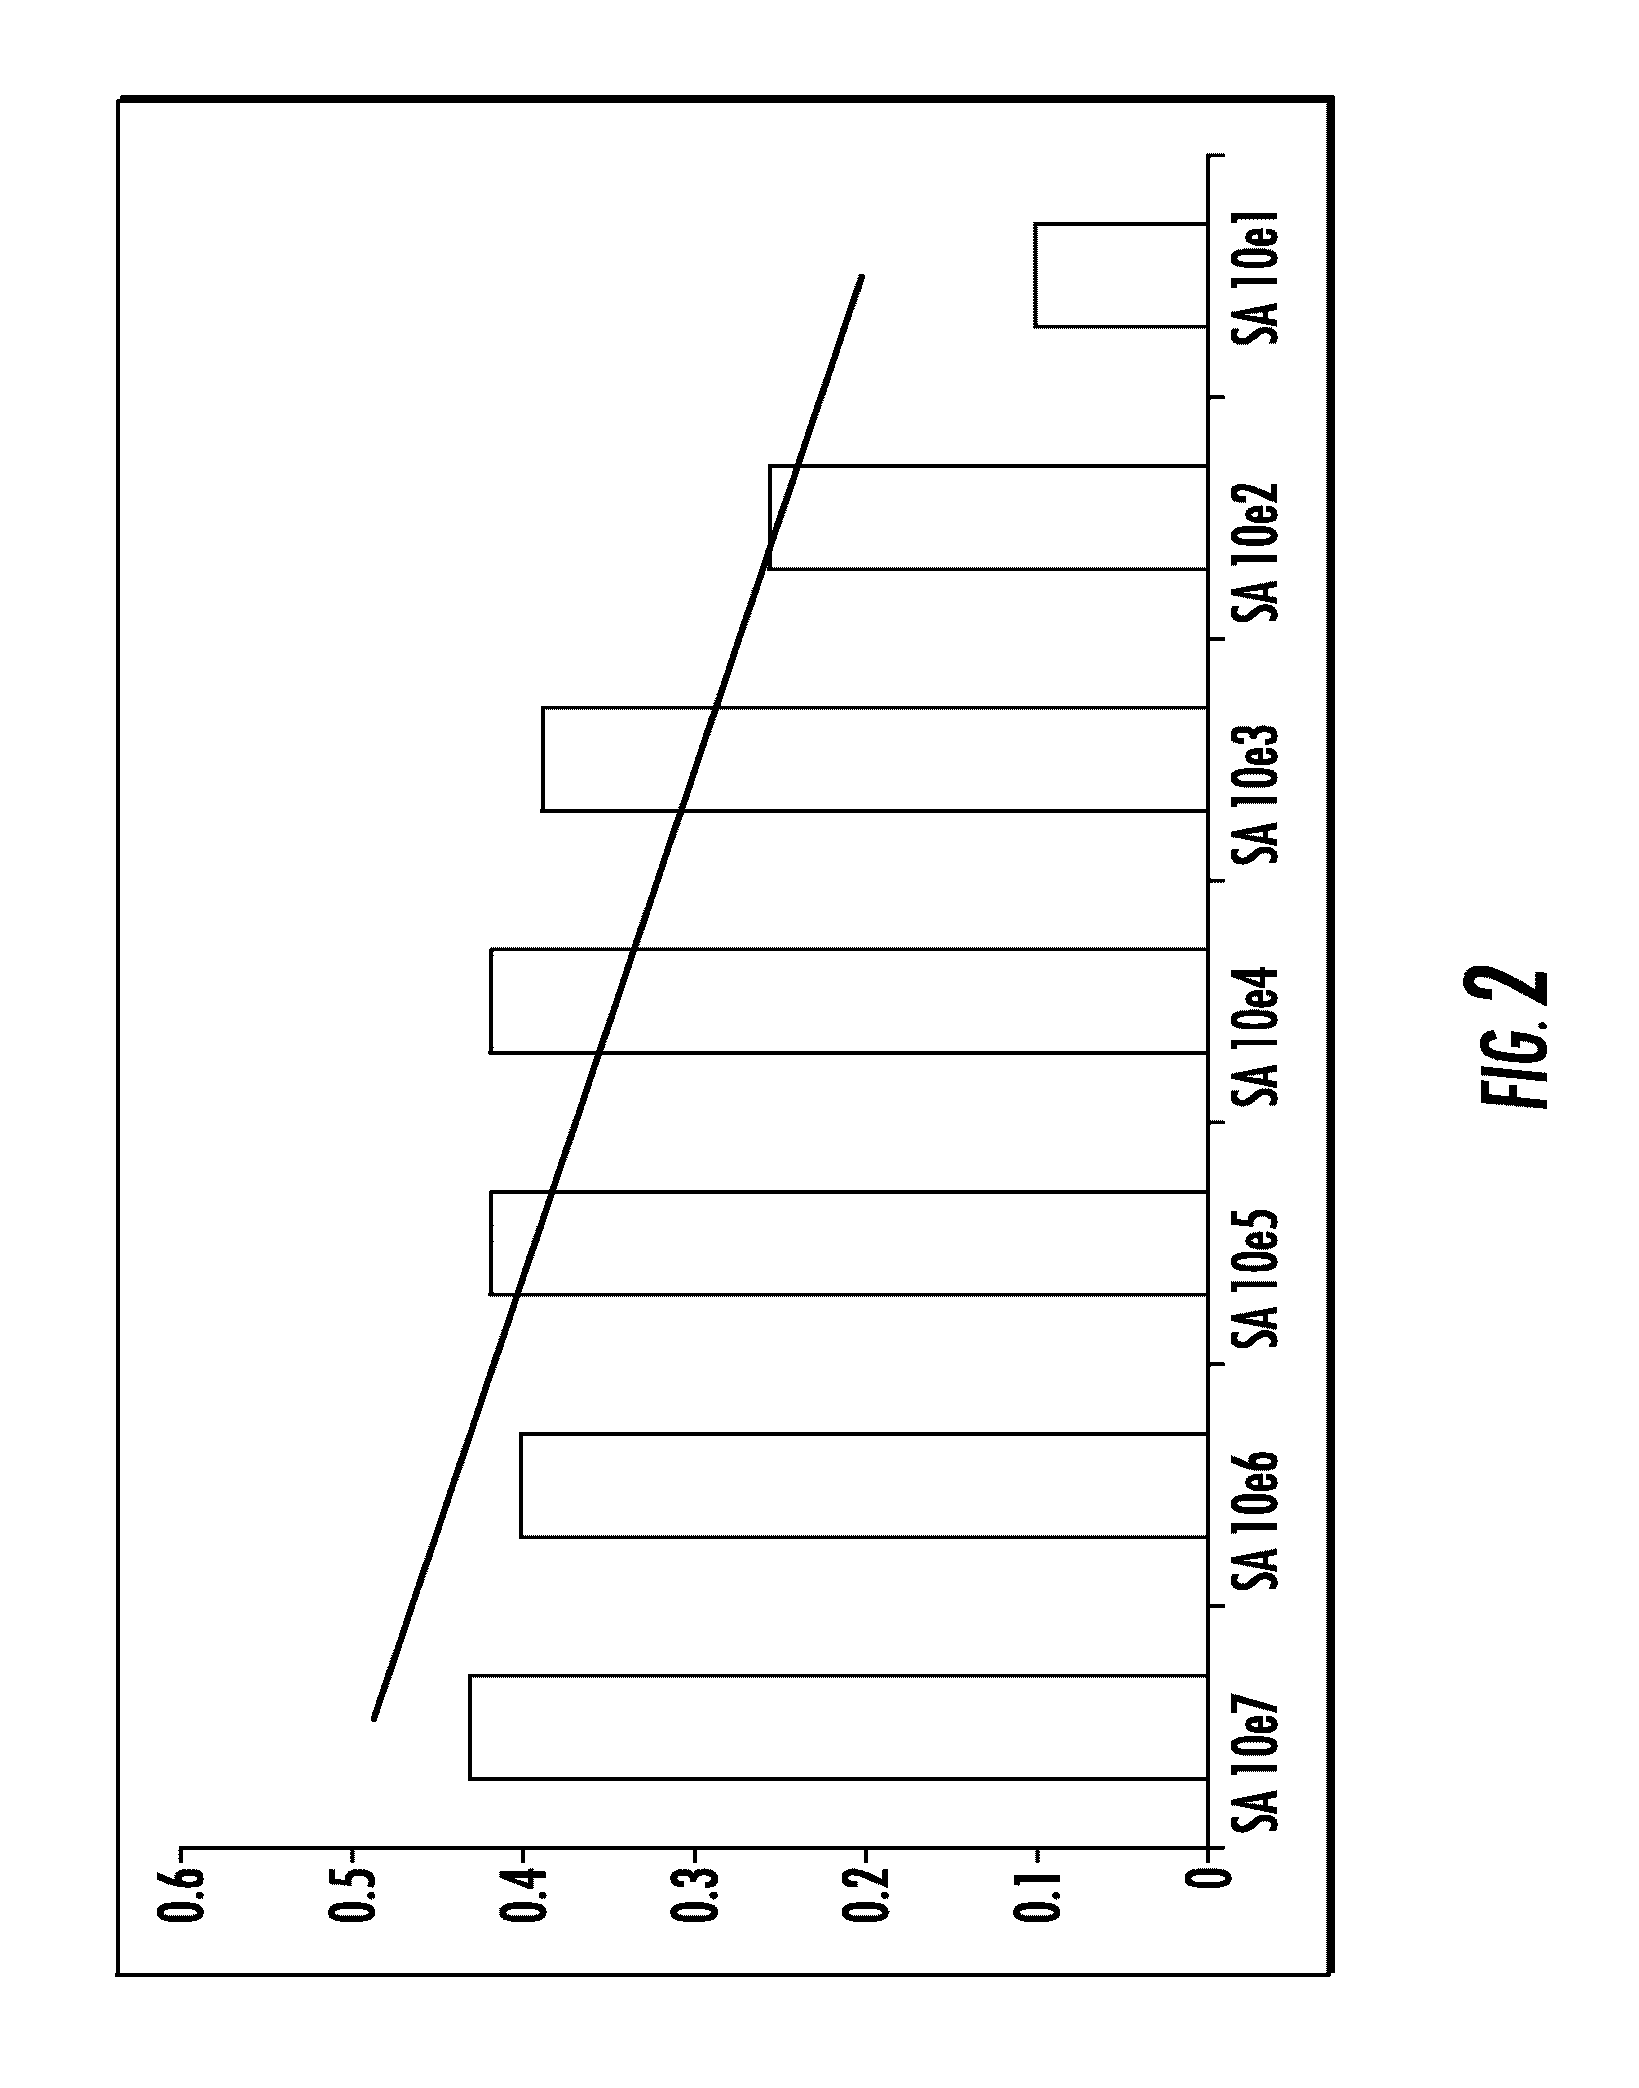 Materials and methods for diagnosis of peri-implant bone and joint infections using  prophenoloxidase pathway